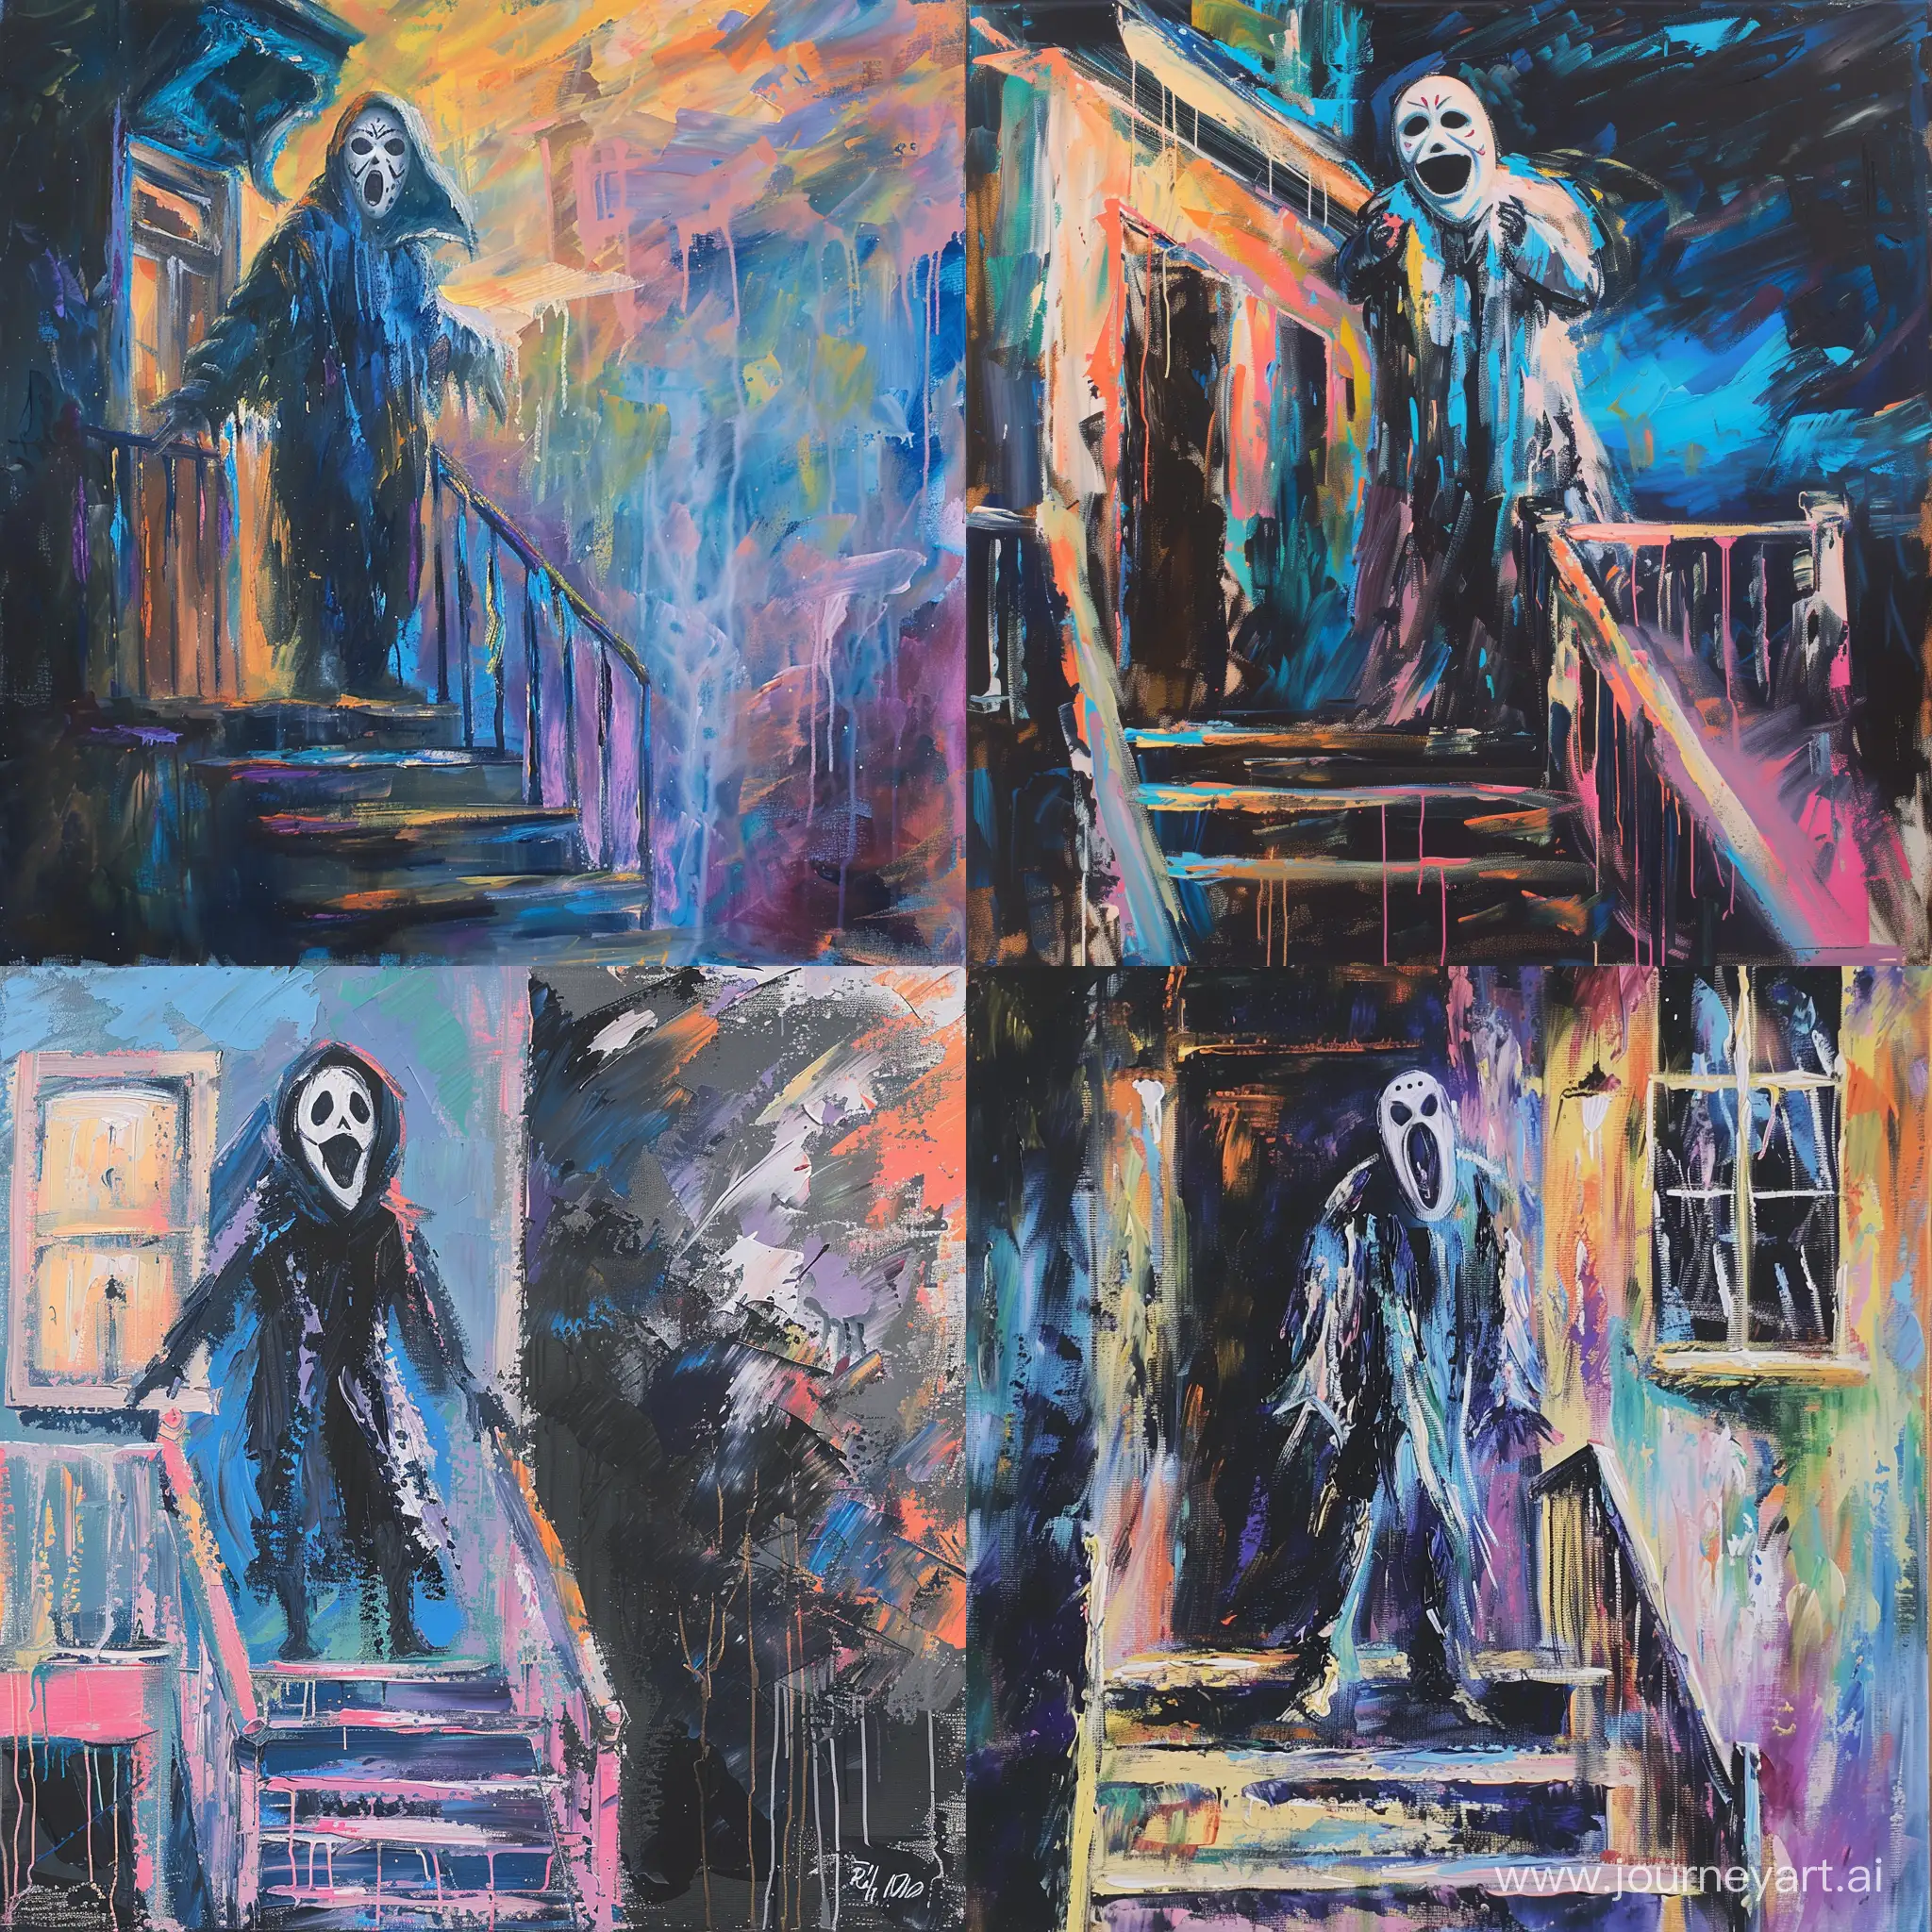 abstract painting in pastel colors, the villain from the movie Scream in a mask stands on the threshold of the house against the background of the night